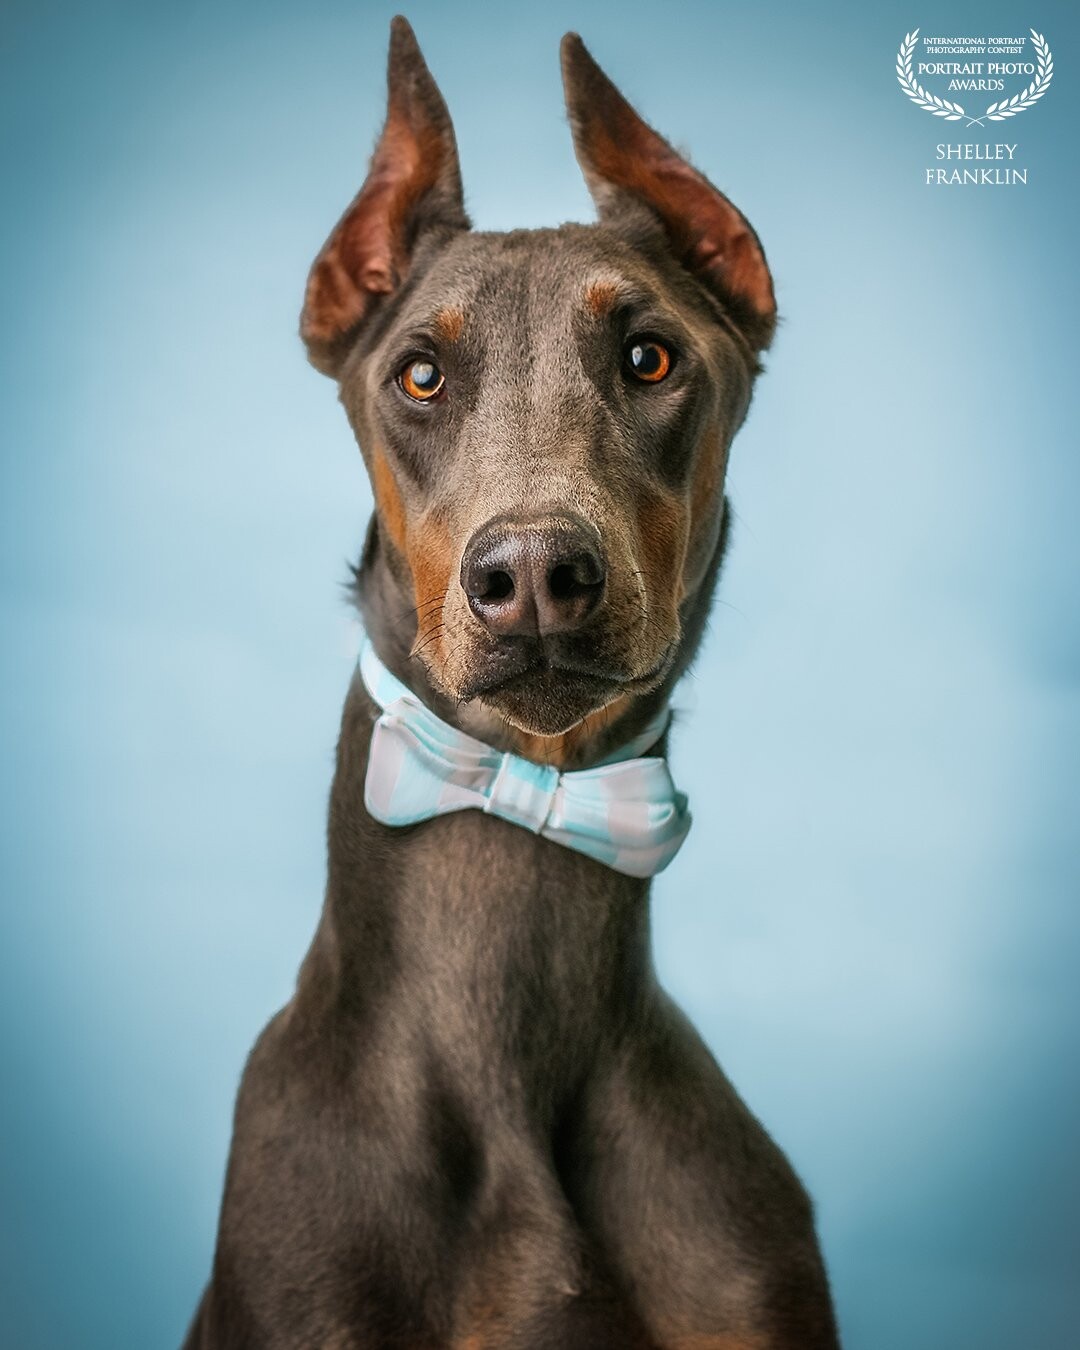 Blue on Blue. <br />
<br />
Heartache to heartache. <br />
<br />
This image was taken as a light test while I prepared for a client. I had no idea this simple photo of my husbands cherished blue Doberman would come to mean so much to us. <br />
He is no longer with us so seeing his sweet face brings a while mix of emotions from happiness to sadness.